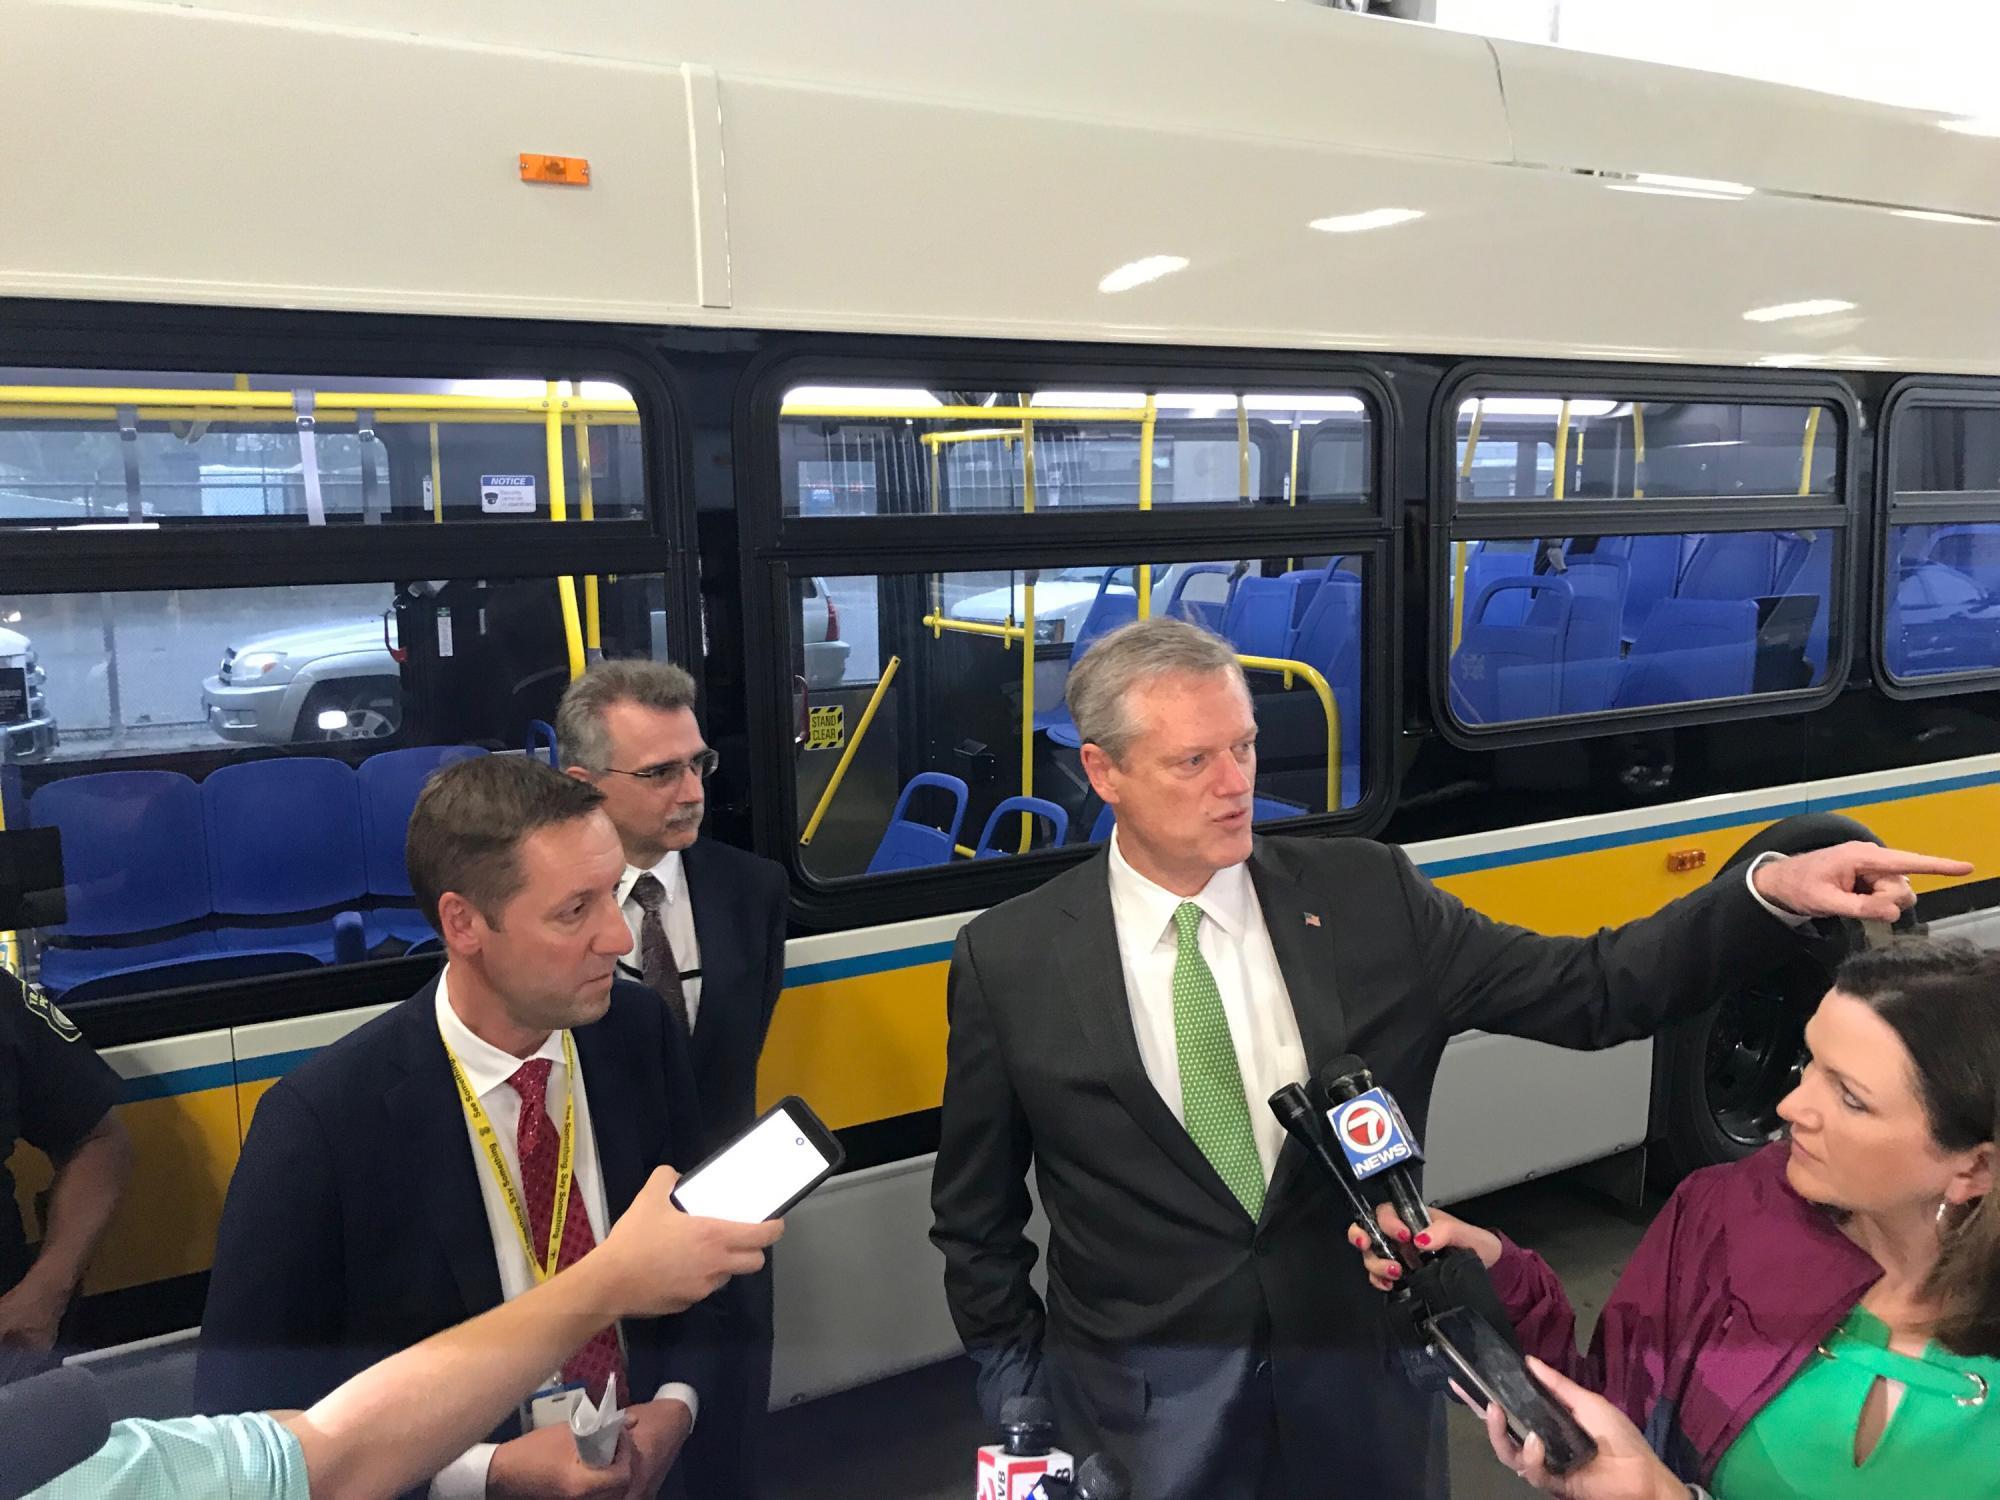 GM Poftak and Governor Baker at the battery-electric bus event